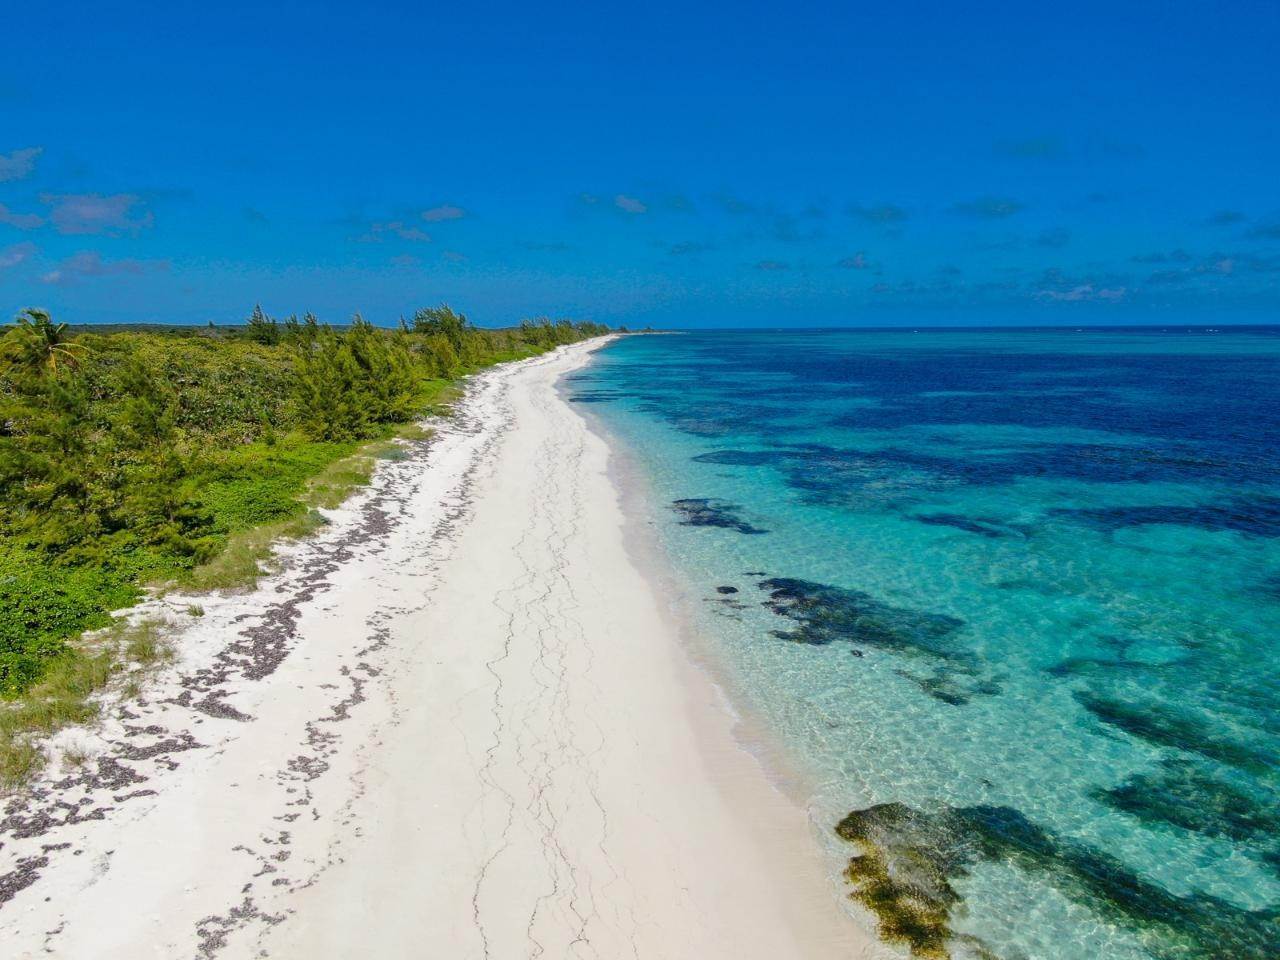 2. Lots / Acreage for Sale at Old Bight, Cat Island, Bahamas